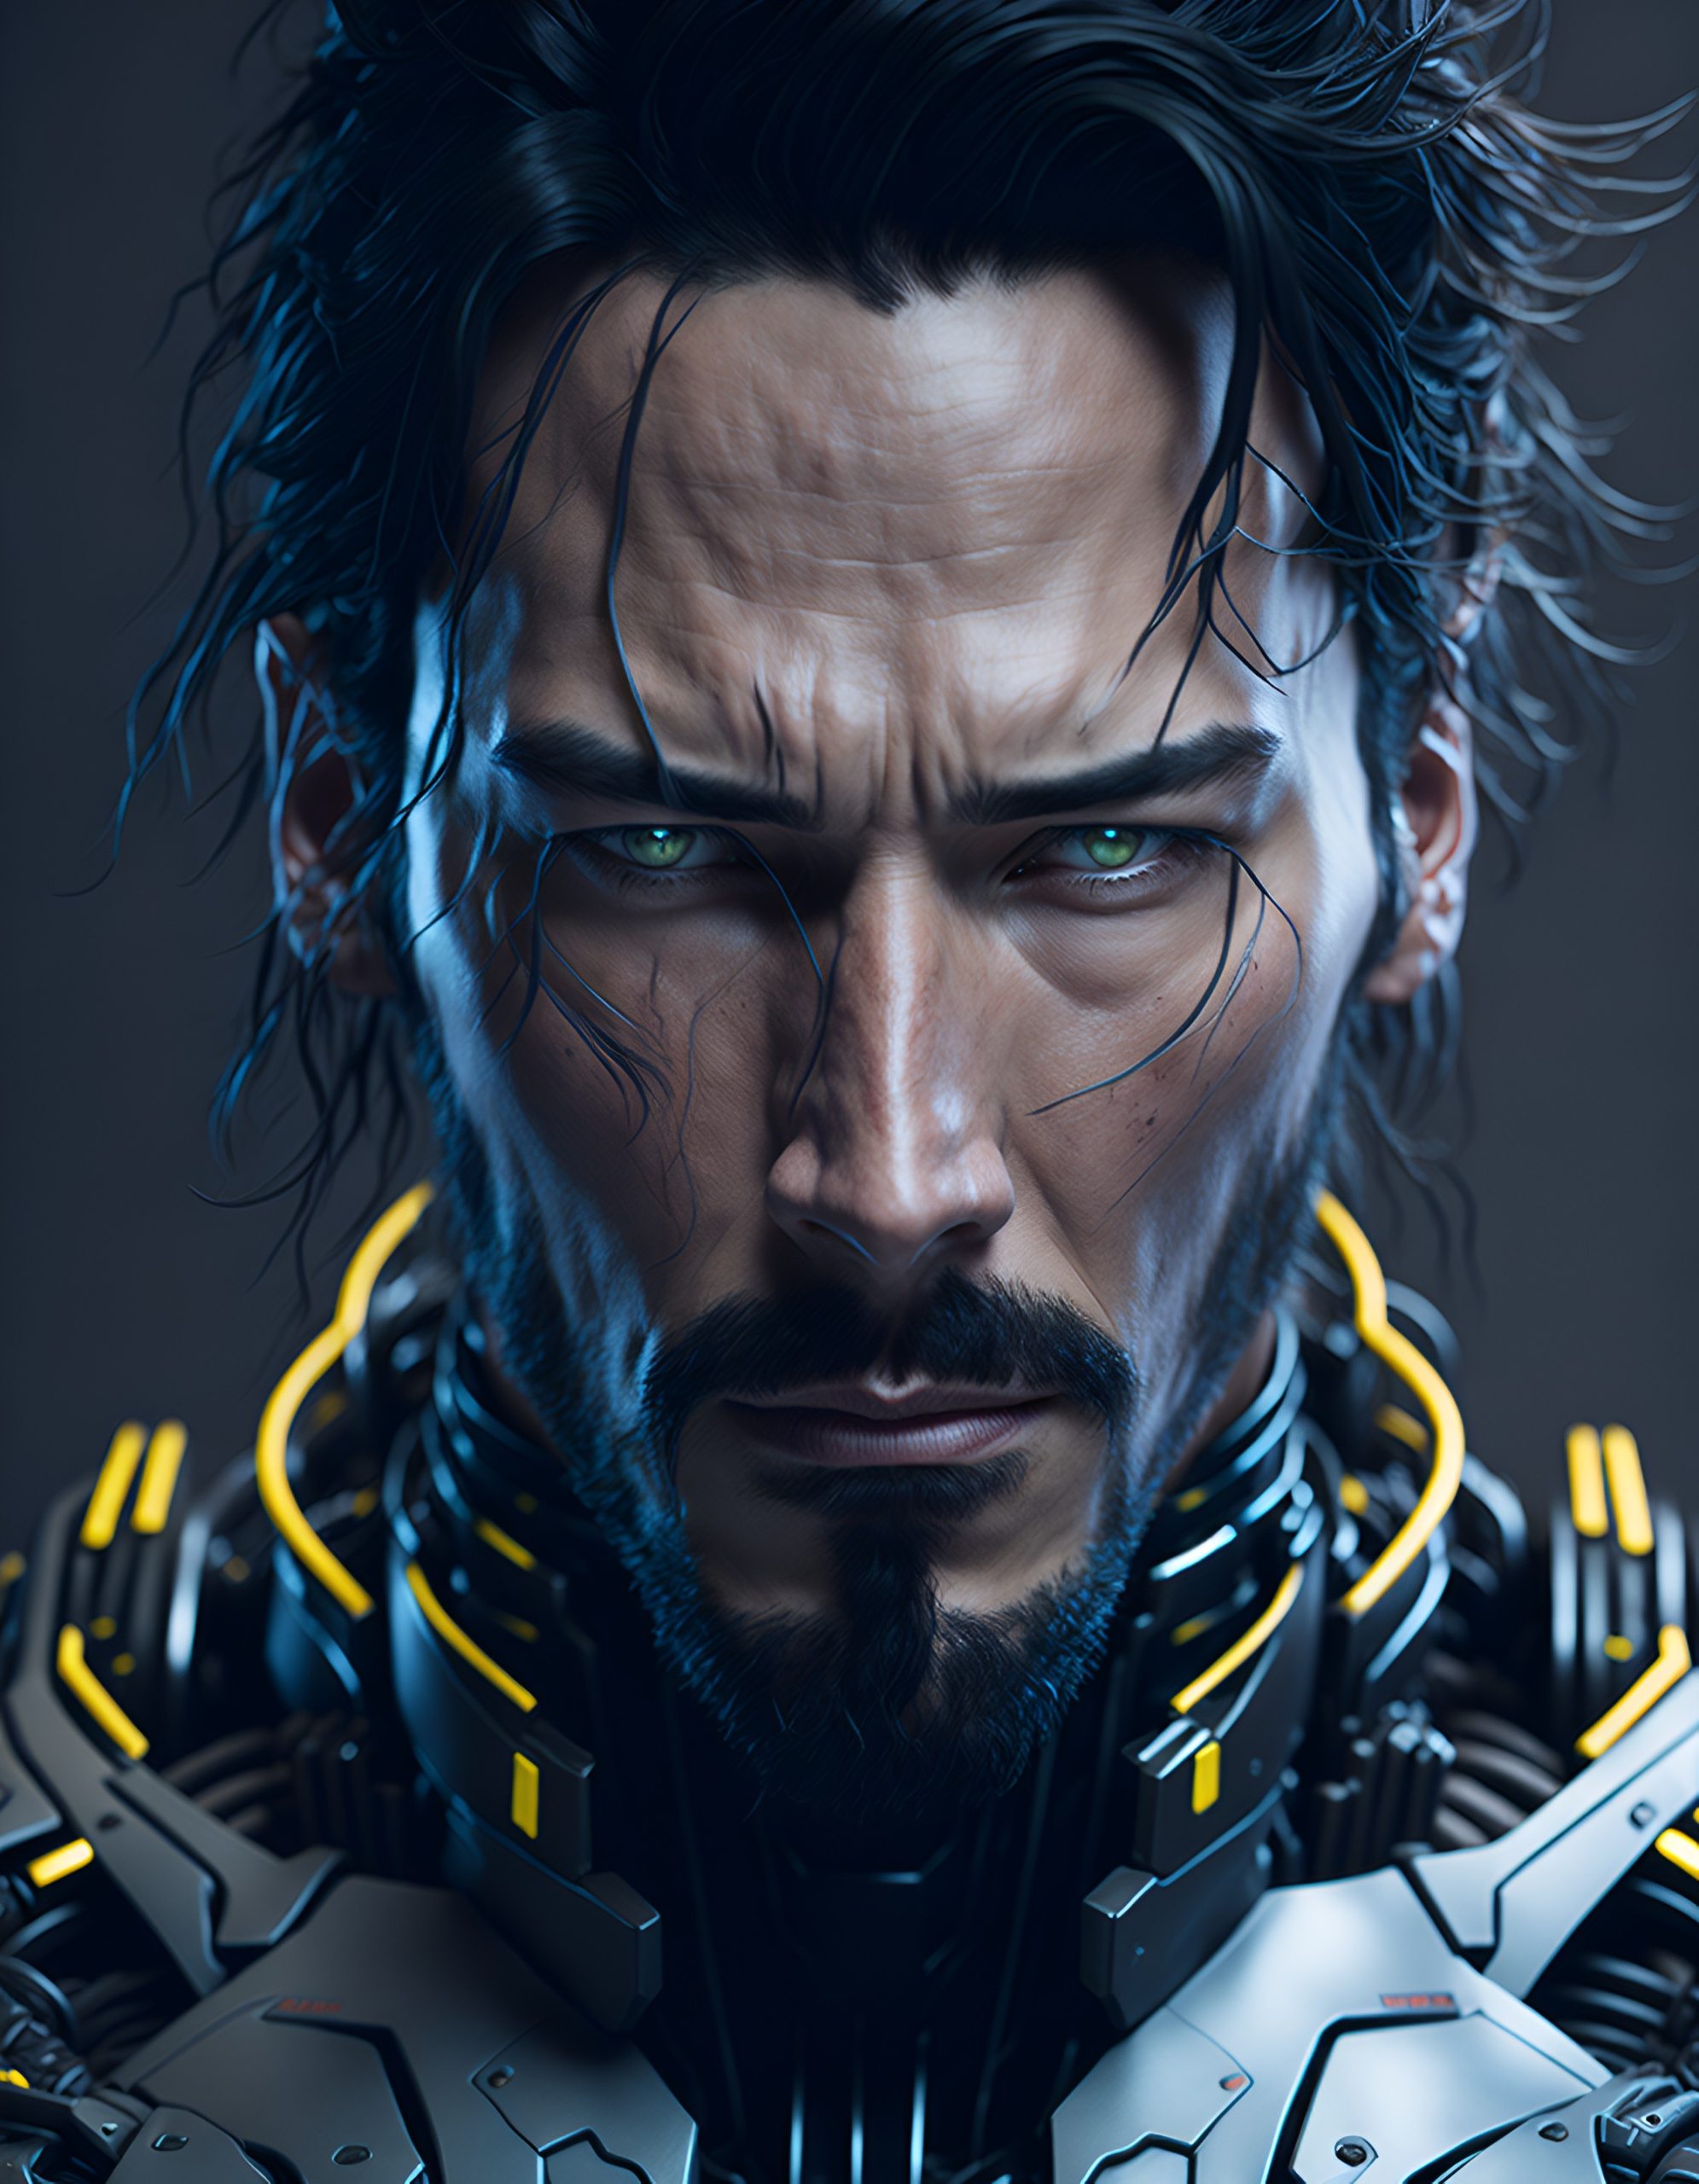 Default hyper realistic perfect face proportions cyborg keanu reeves 0 2d8e0bfc 17ad 4d67 84b6 80e6434143c2 1 scaled